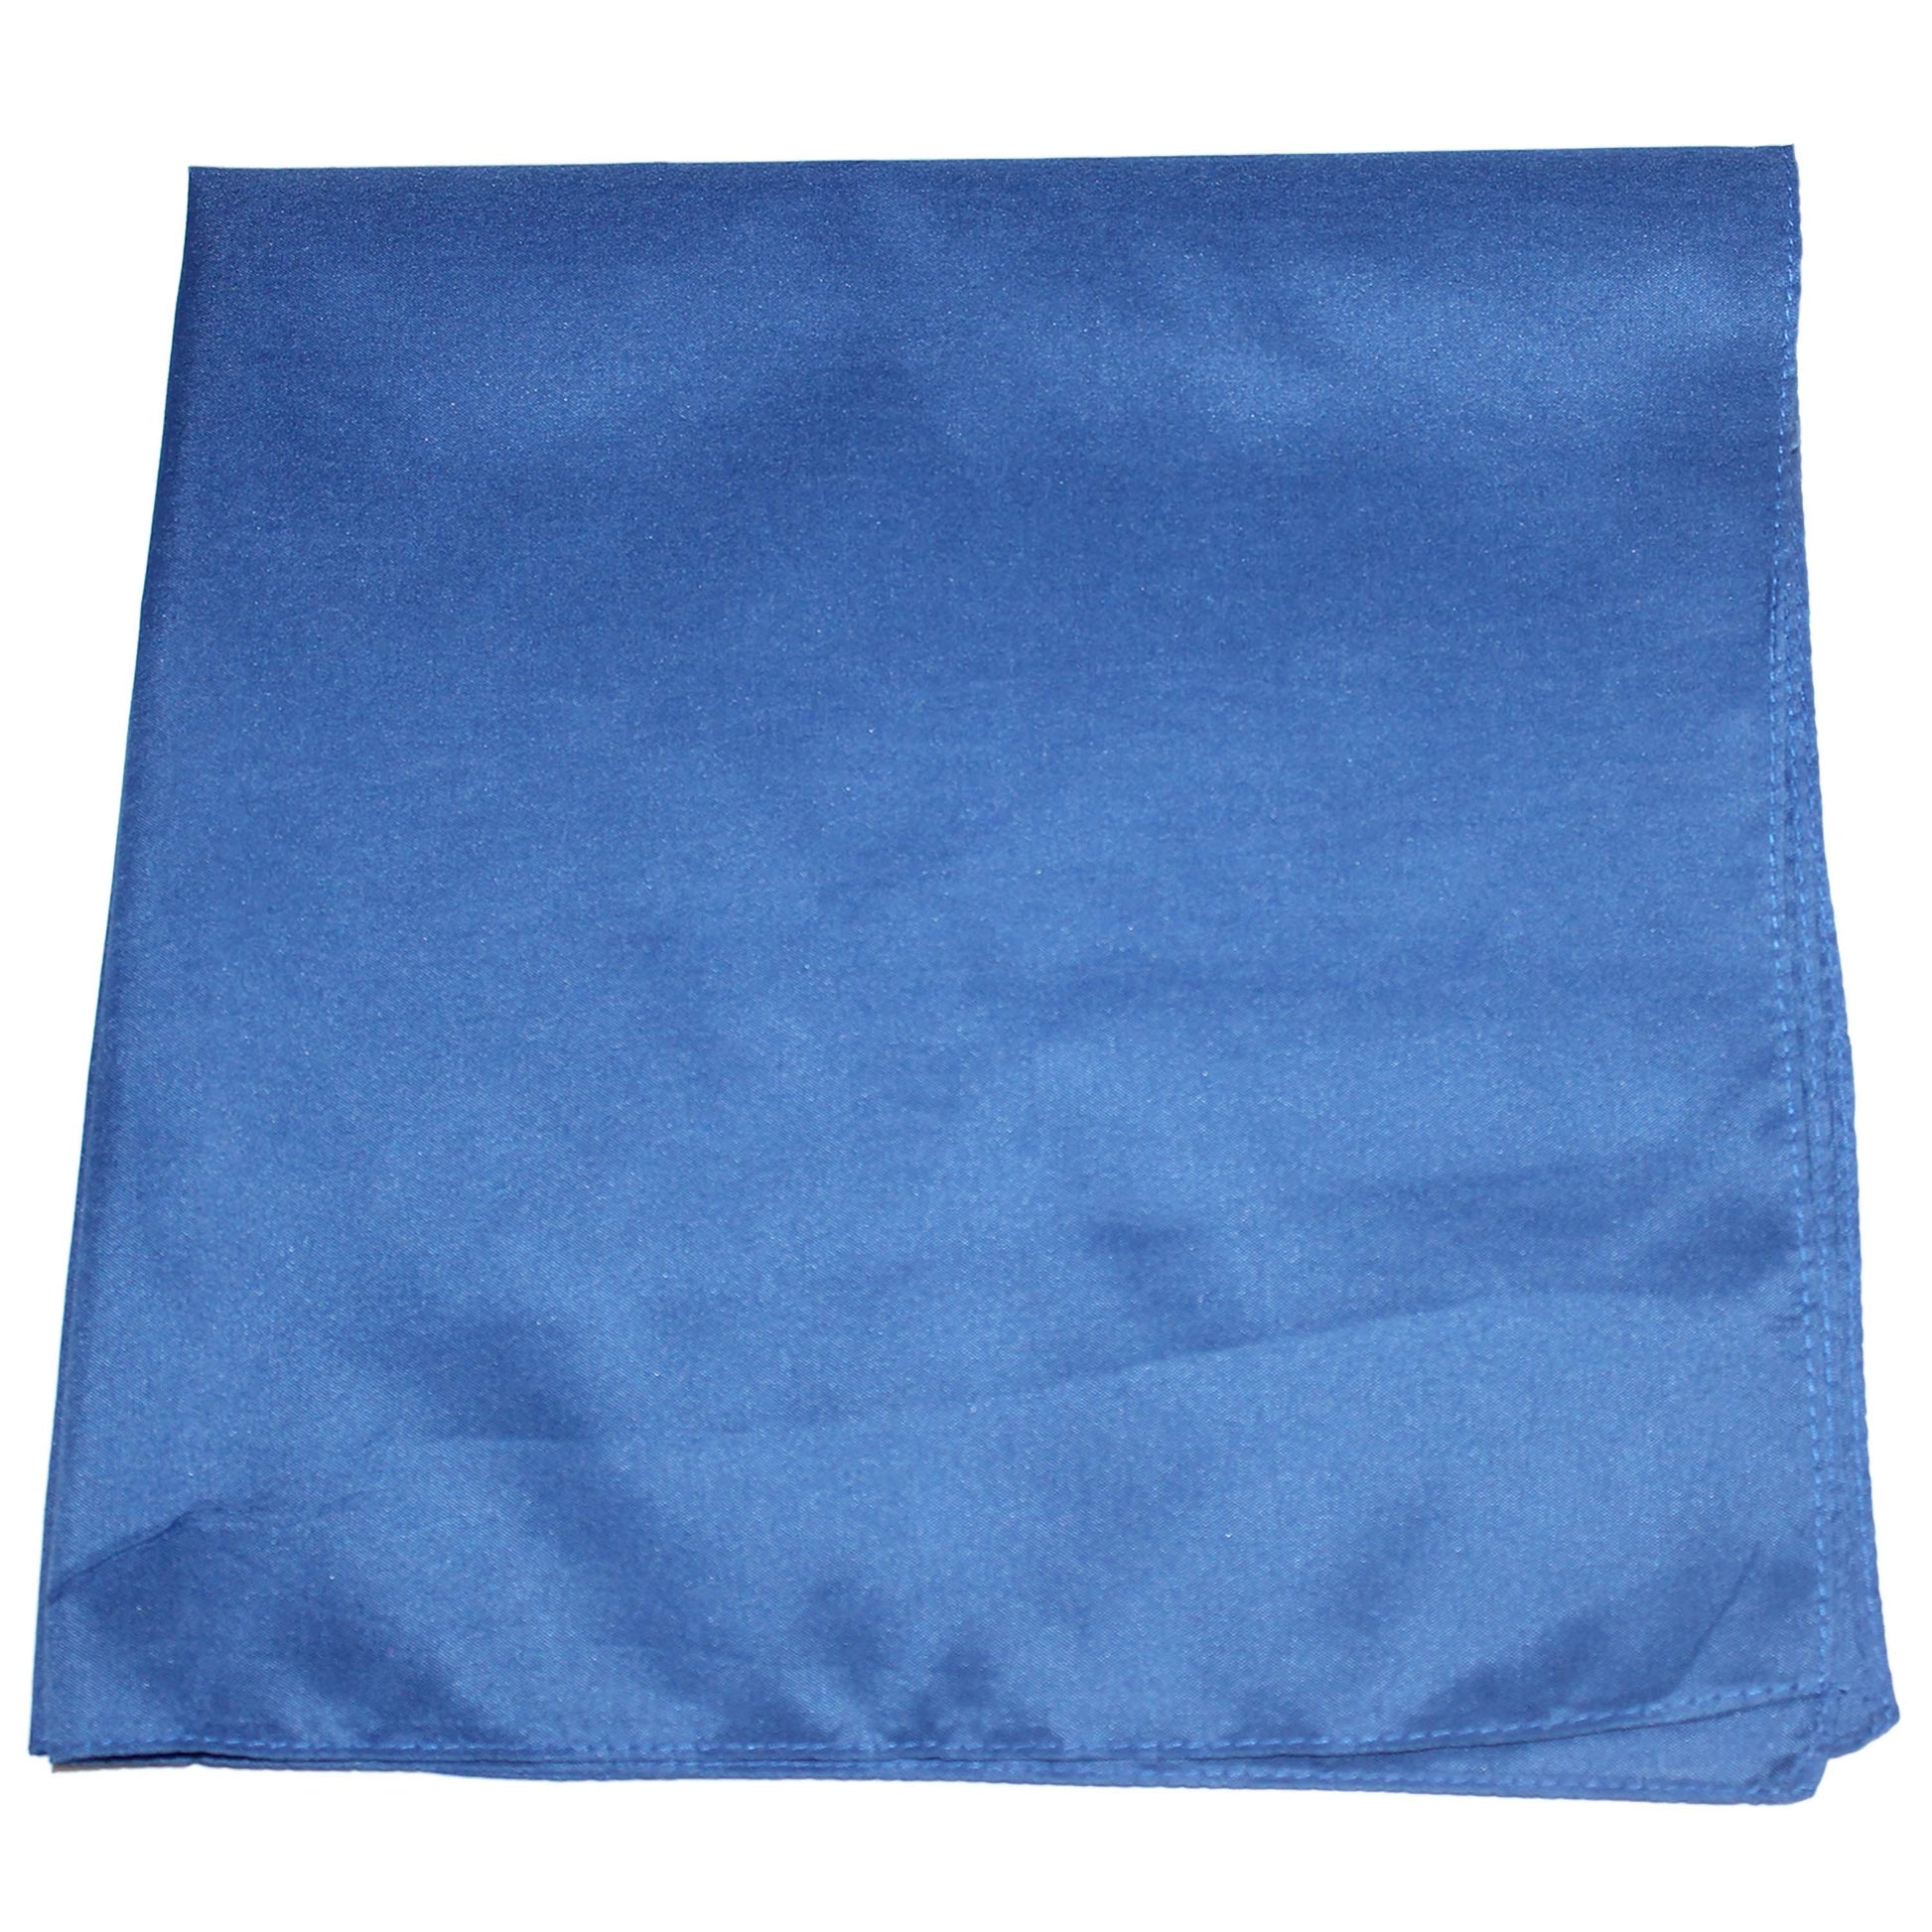 Pack of 48 Plain Polyester 22 x 22 Inch Bandanas